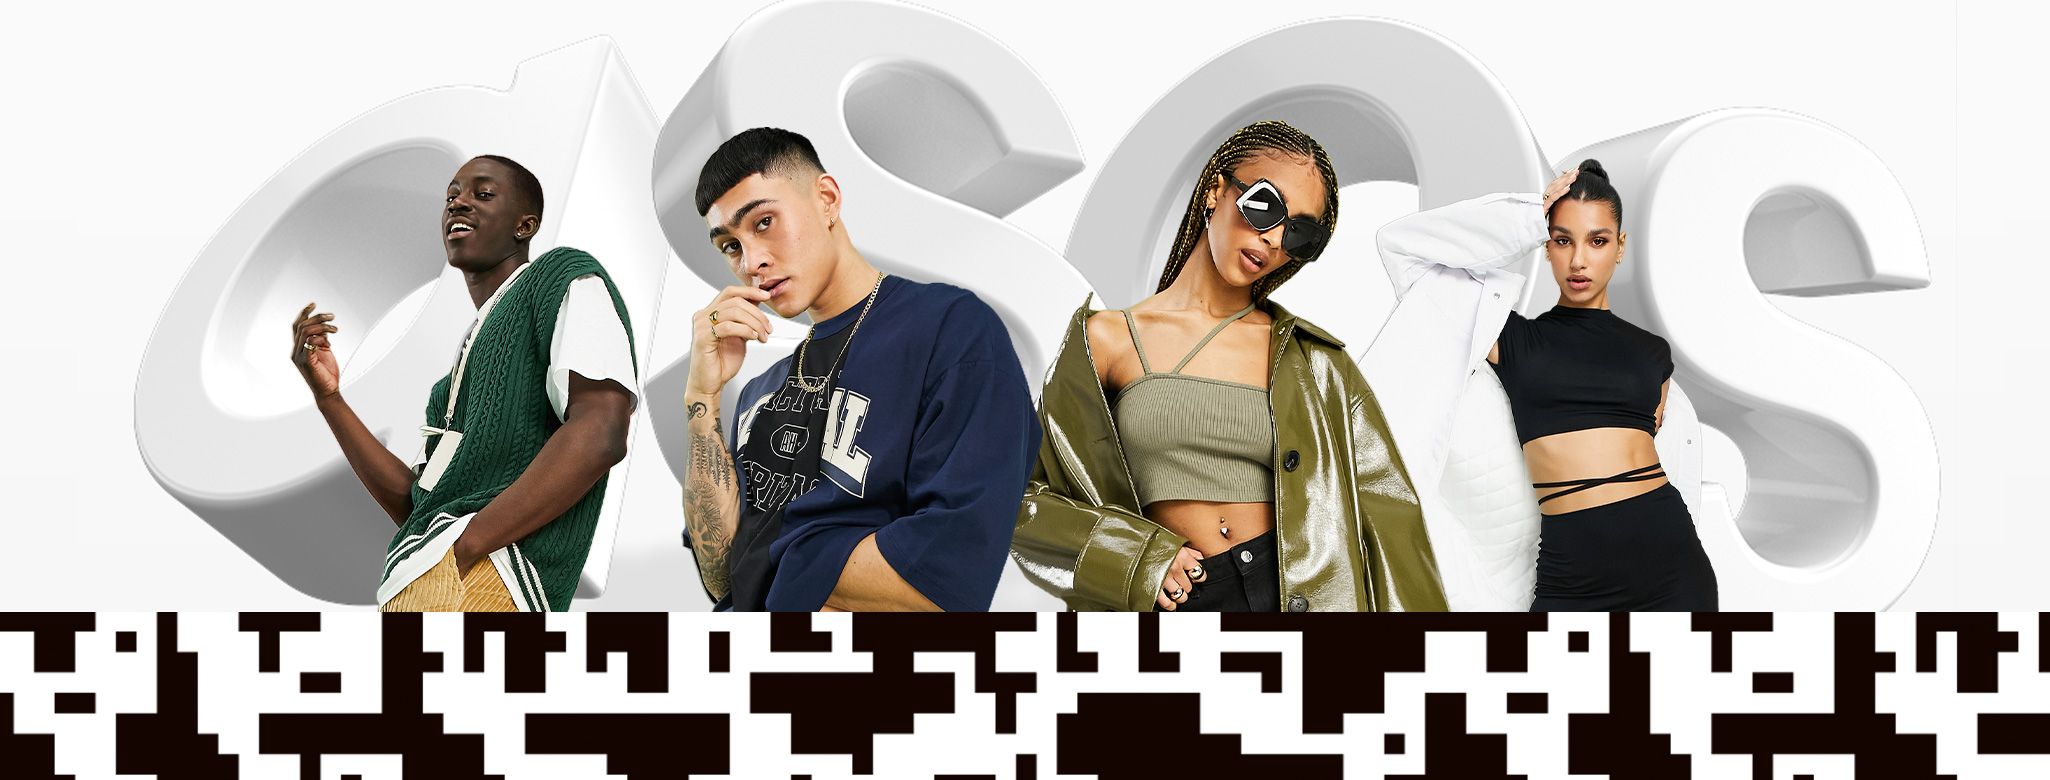 20% OFF on everything for men & women styles with this ASOS discount code